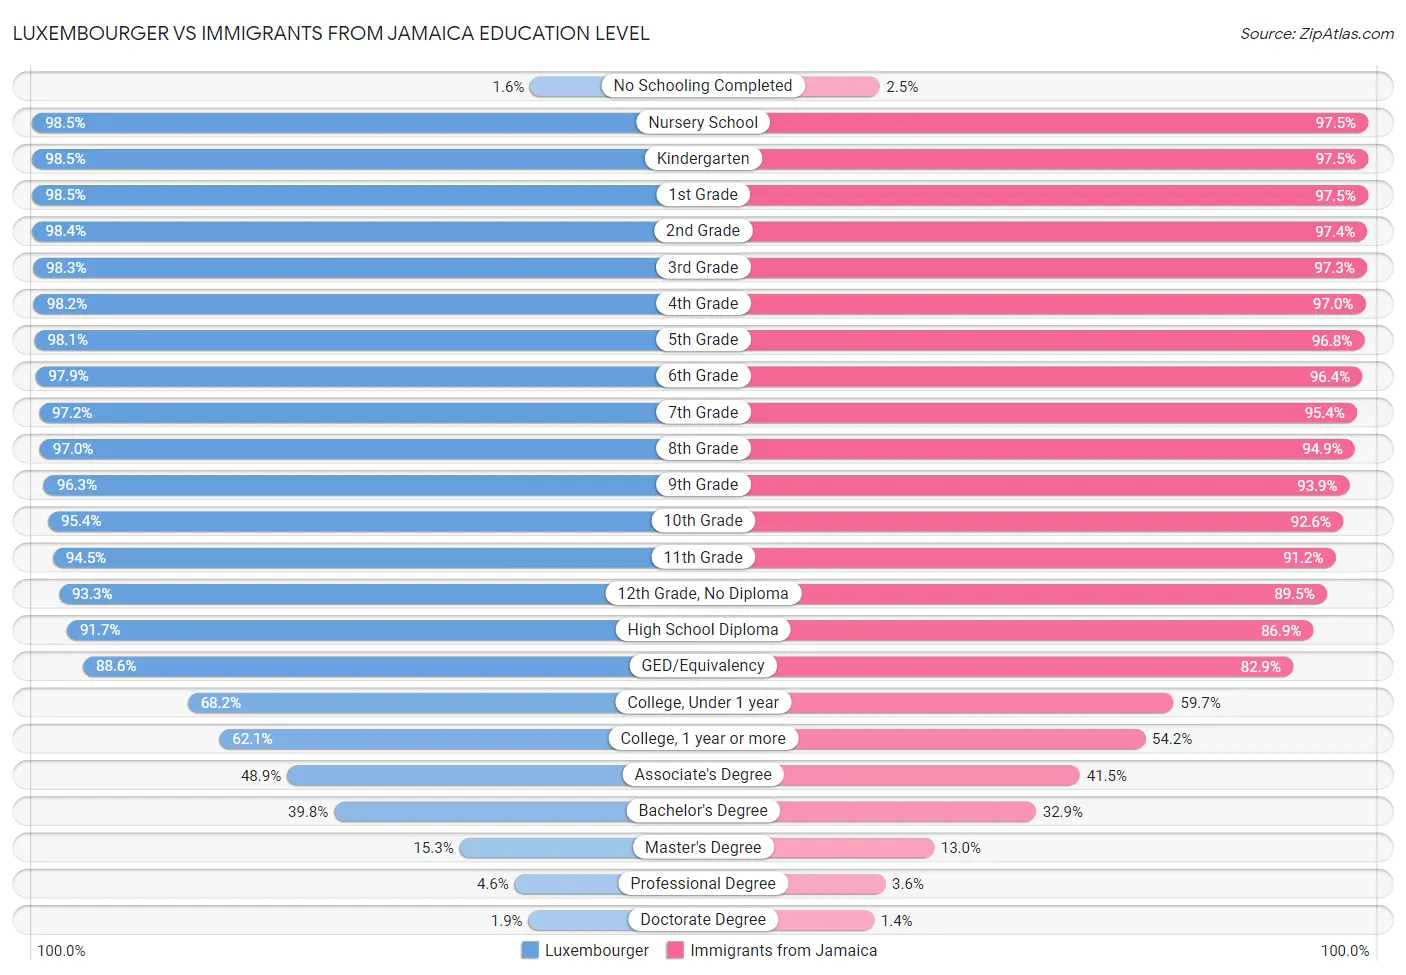 Luxembourger vs Immigrants from Jamaica Education Level